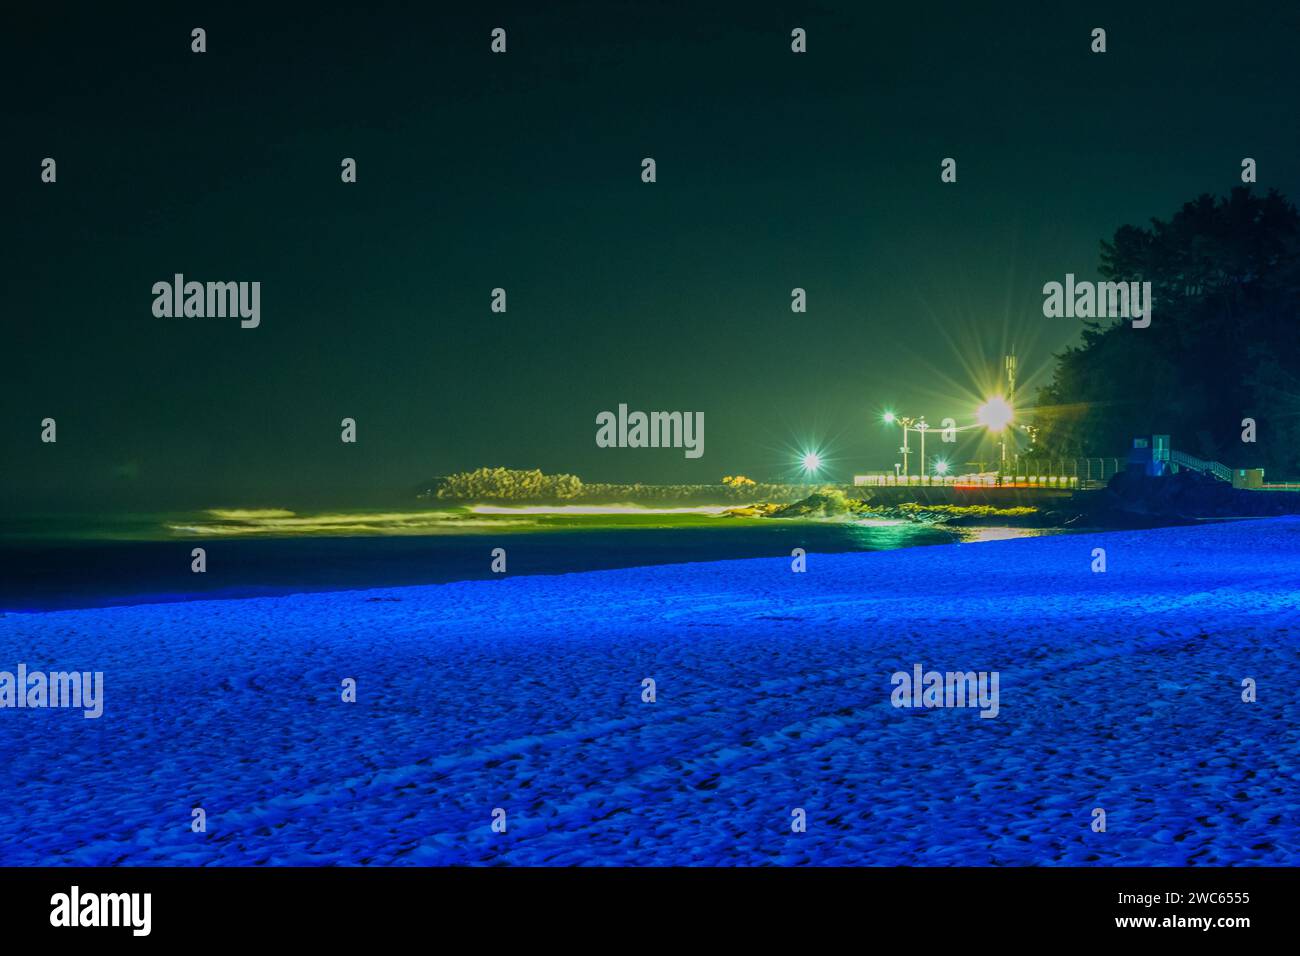 Night scene at beach soft blue light with pier lit up by street lights in background Stock Photo